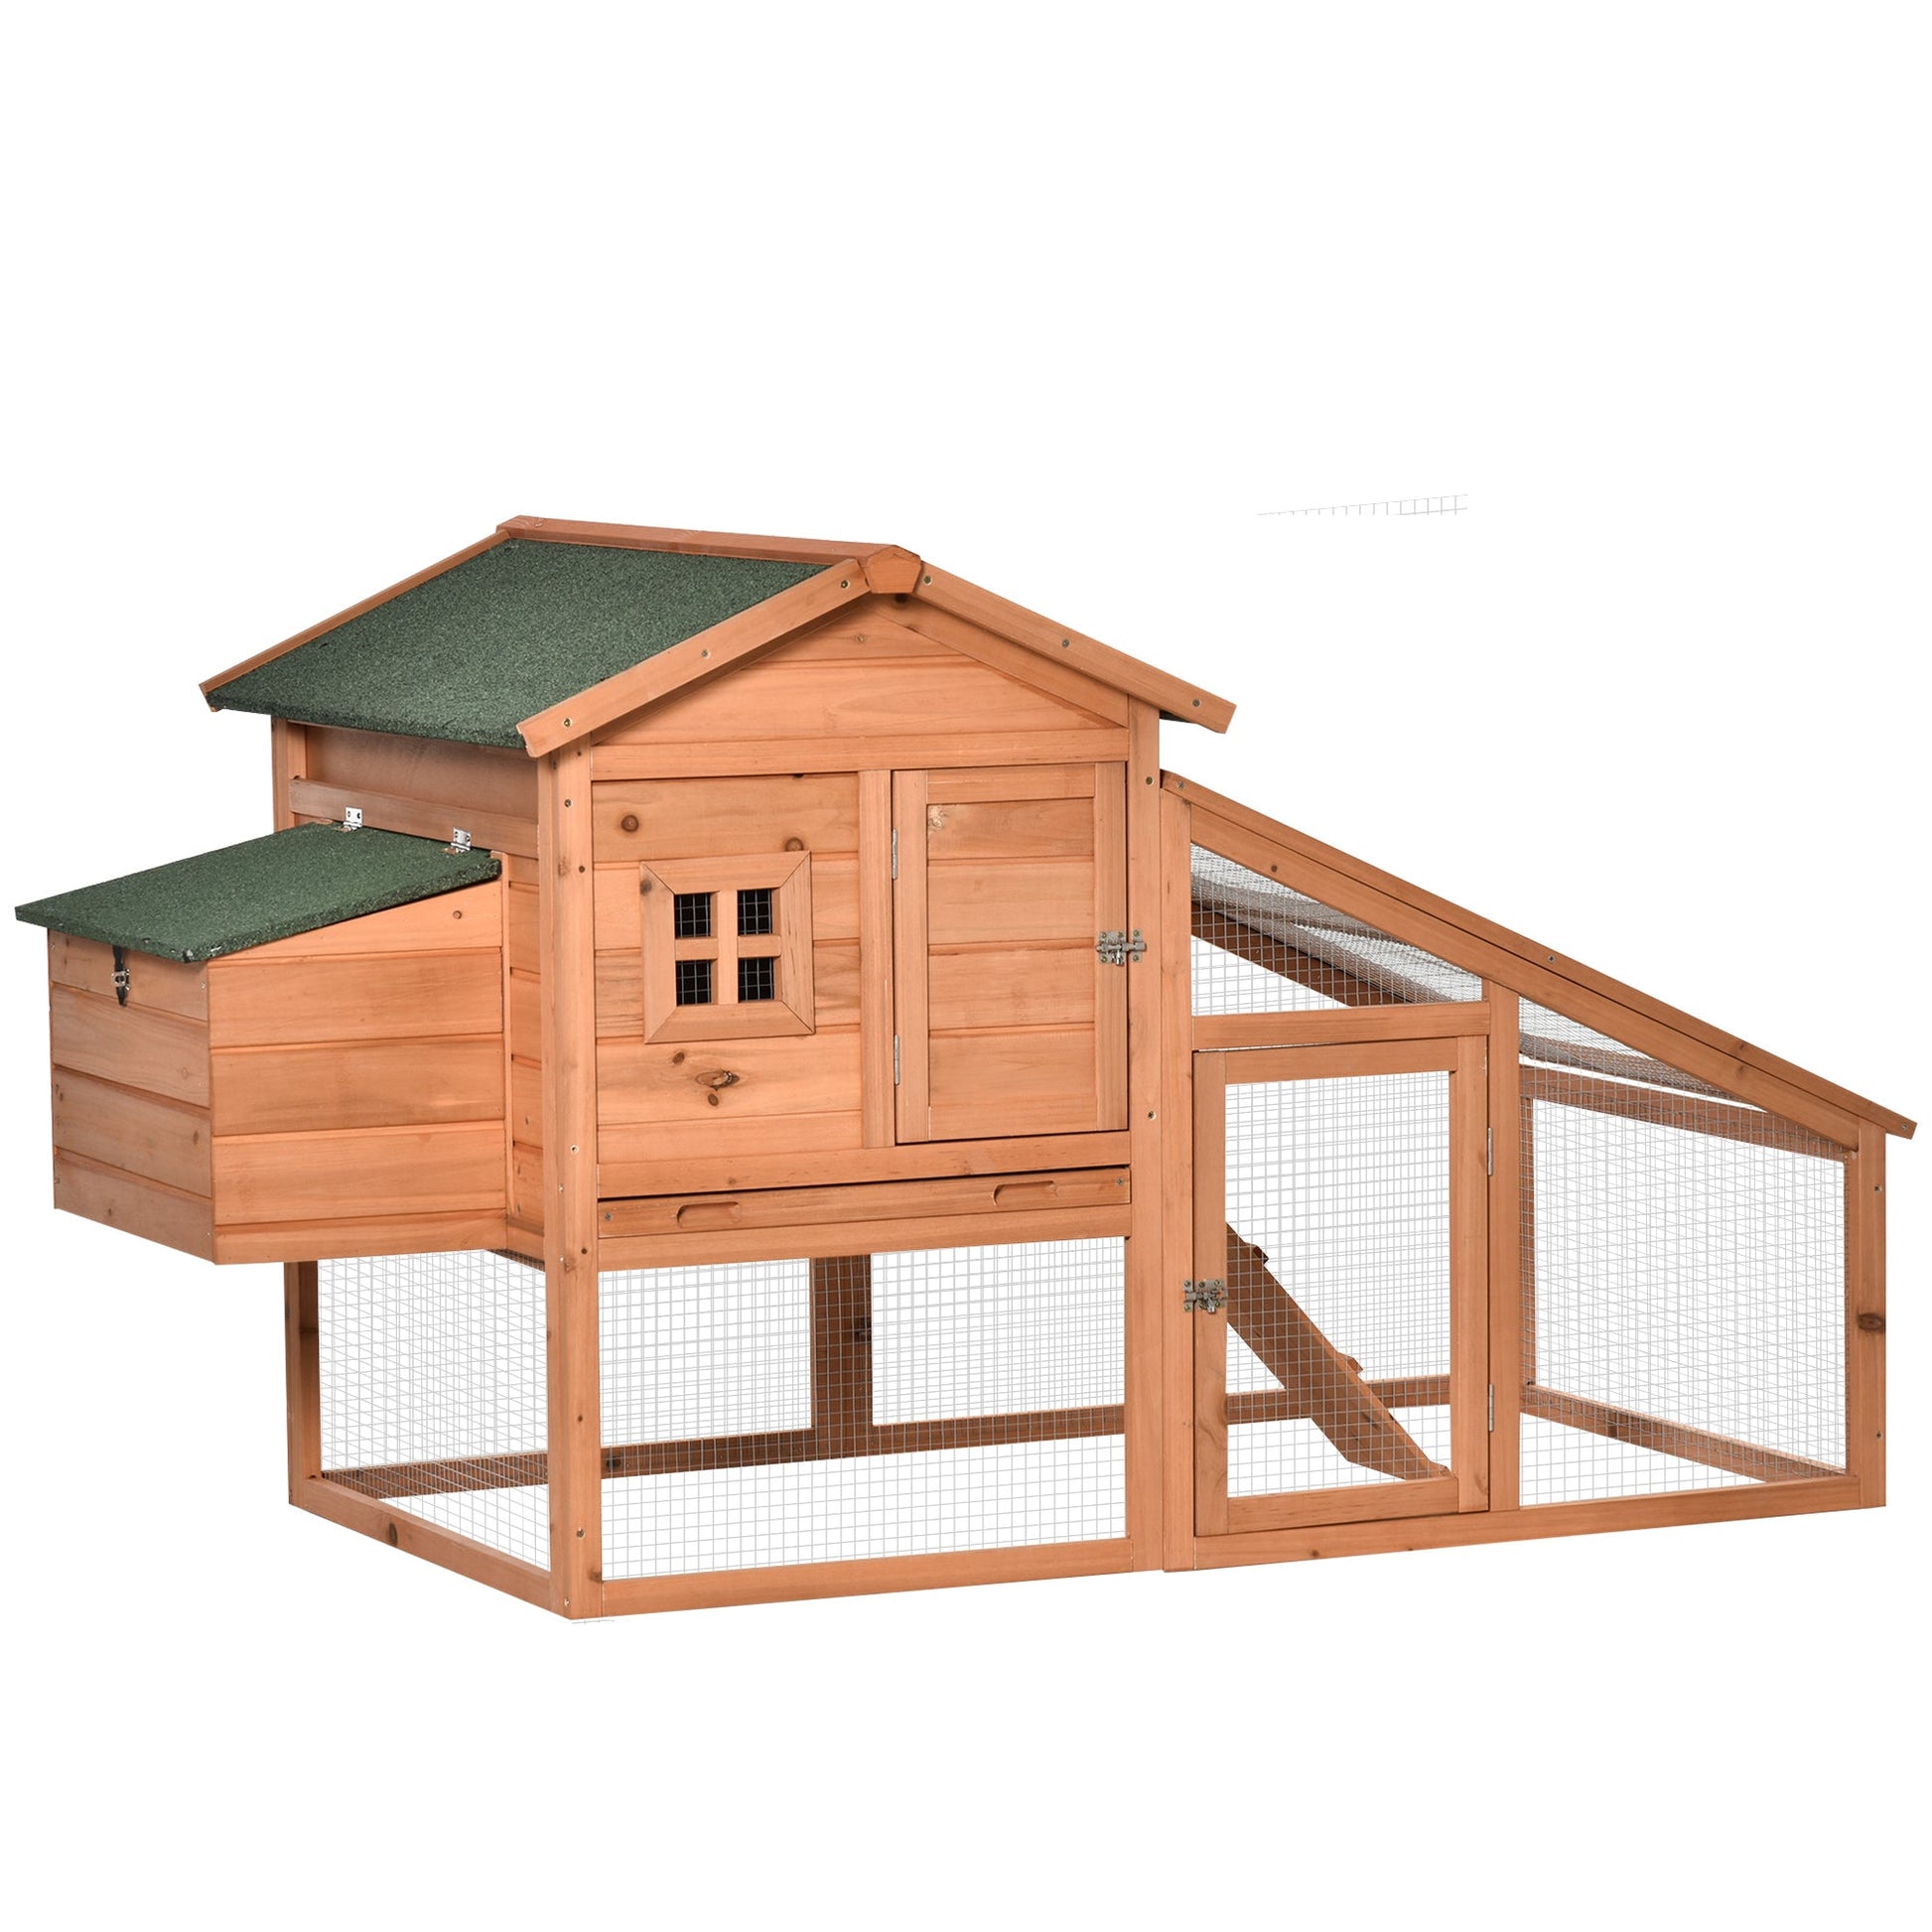 69" Chicken Coop Wooden Hen House Rabbit Hutch Poultry Cage Pen Outdoor Backyard with Outdoor Run Resting Nesting Box Removable Tray Waterproof Asphalt Roof Lockable Door Yellow and Green at Gallery Canada